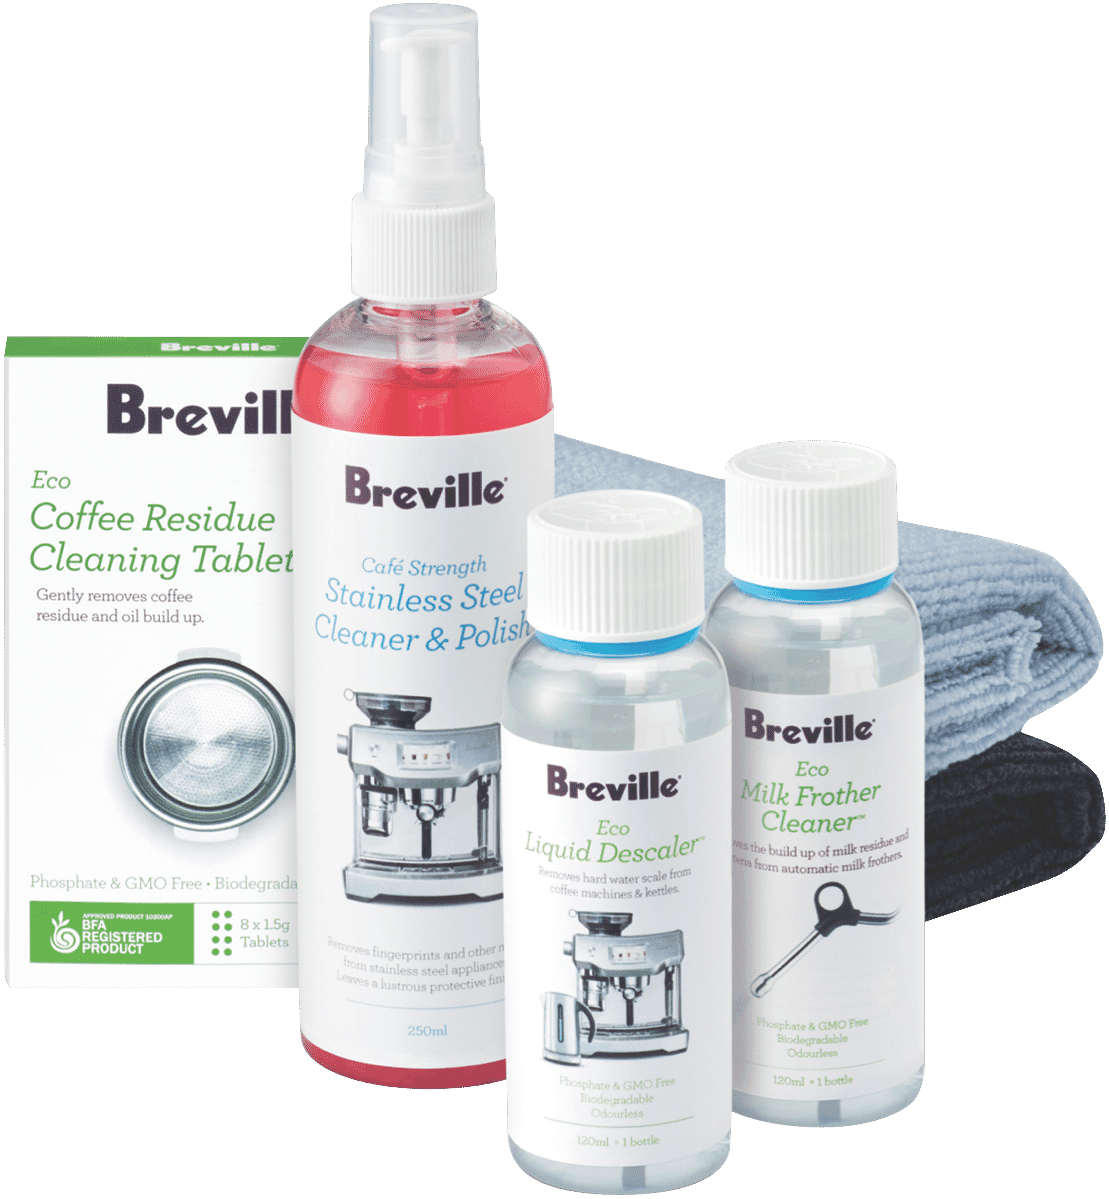 Breville BES015CLR0NAN1 Coffee Accessory Cleaning Pack at The Good